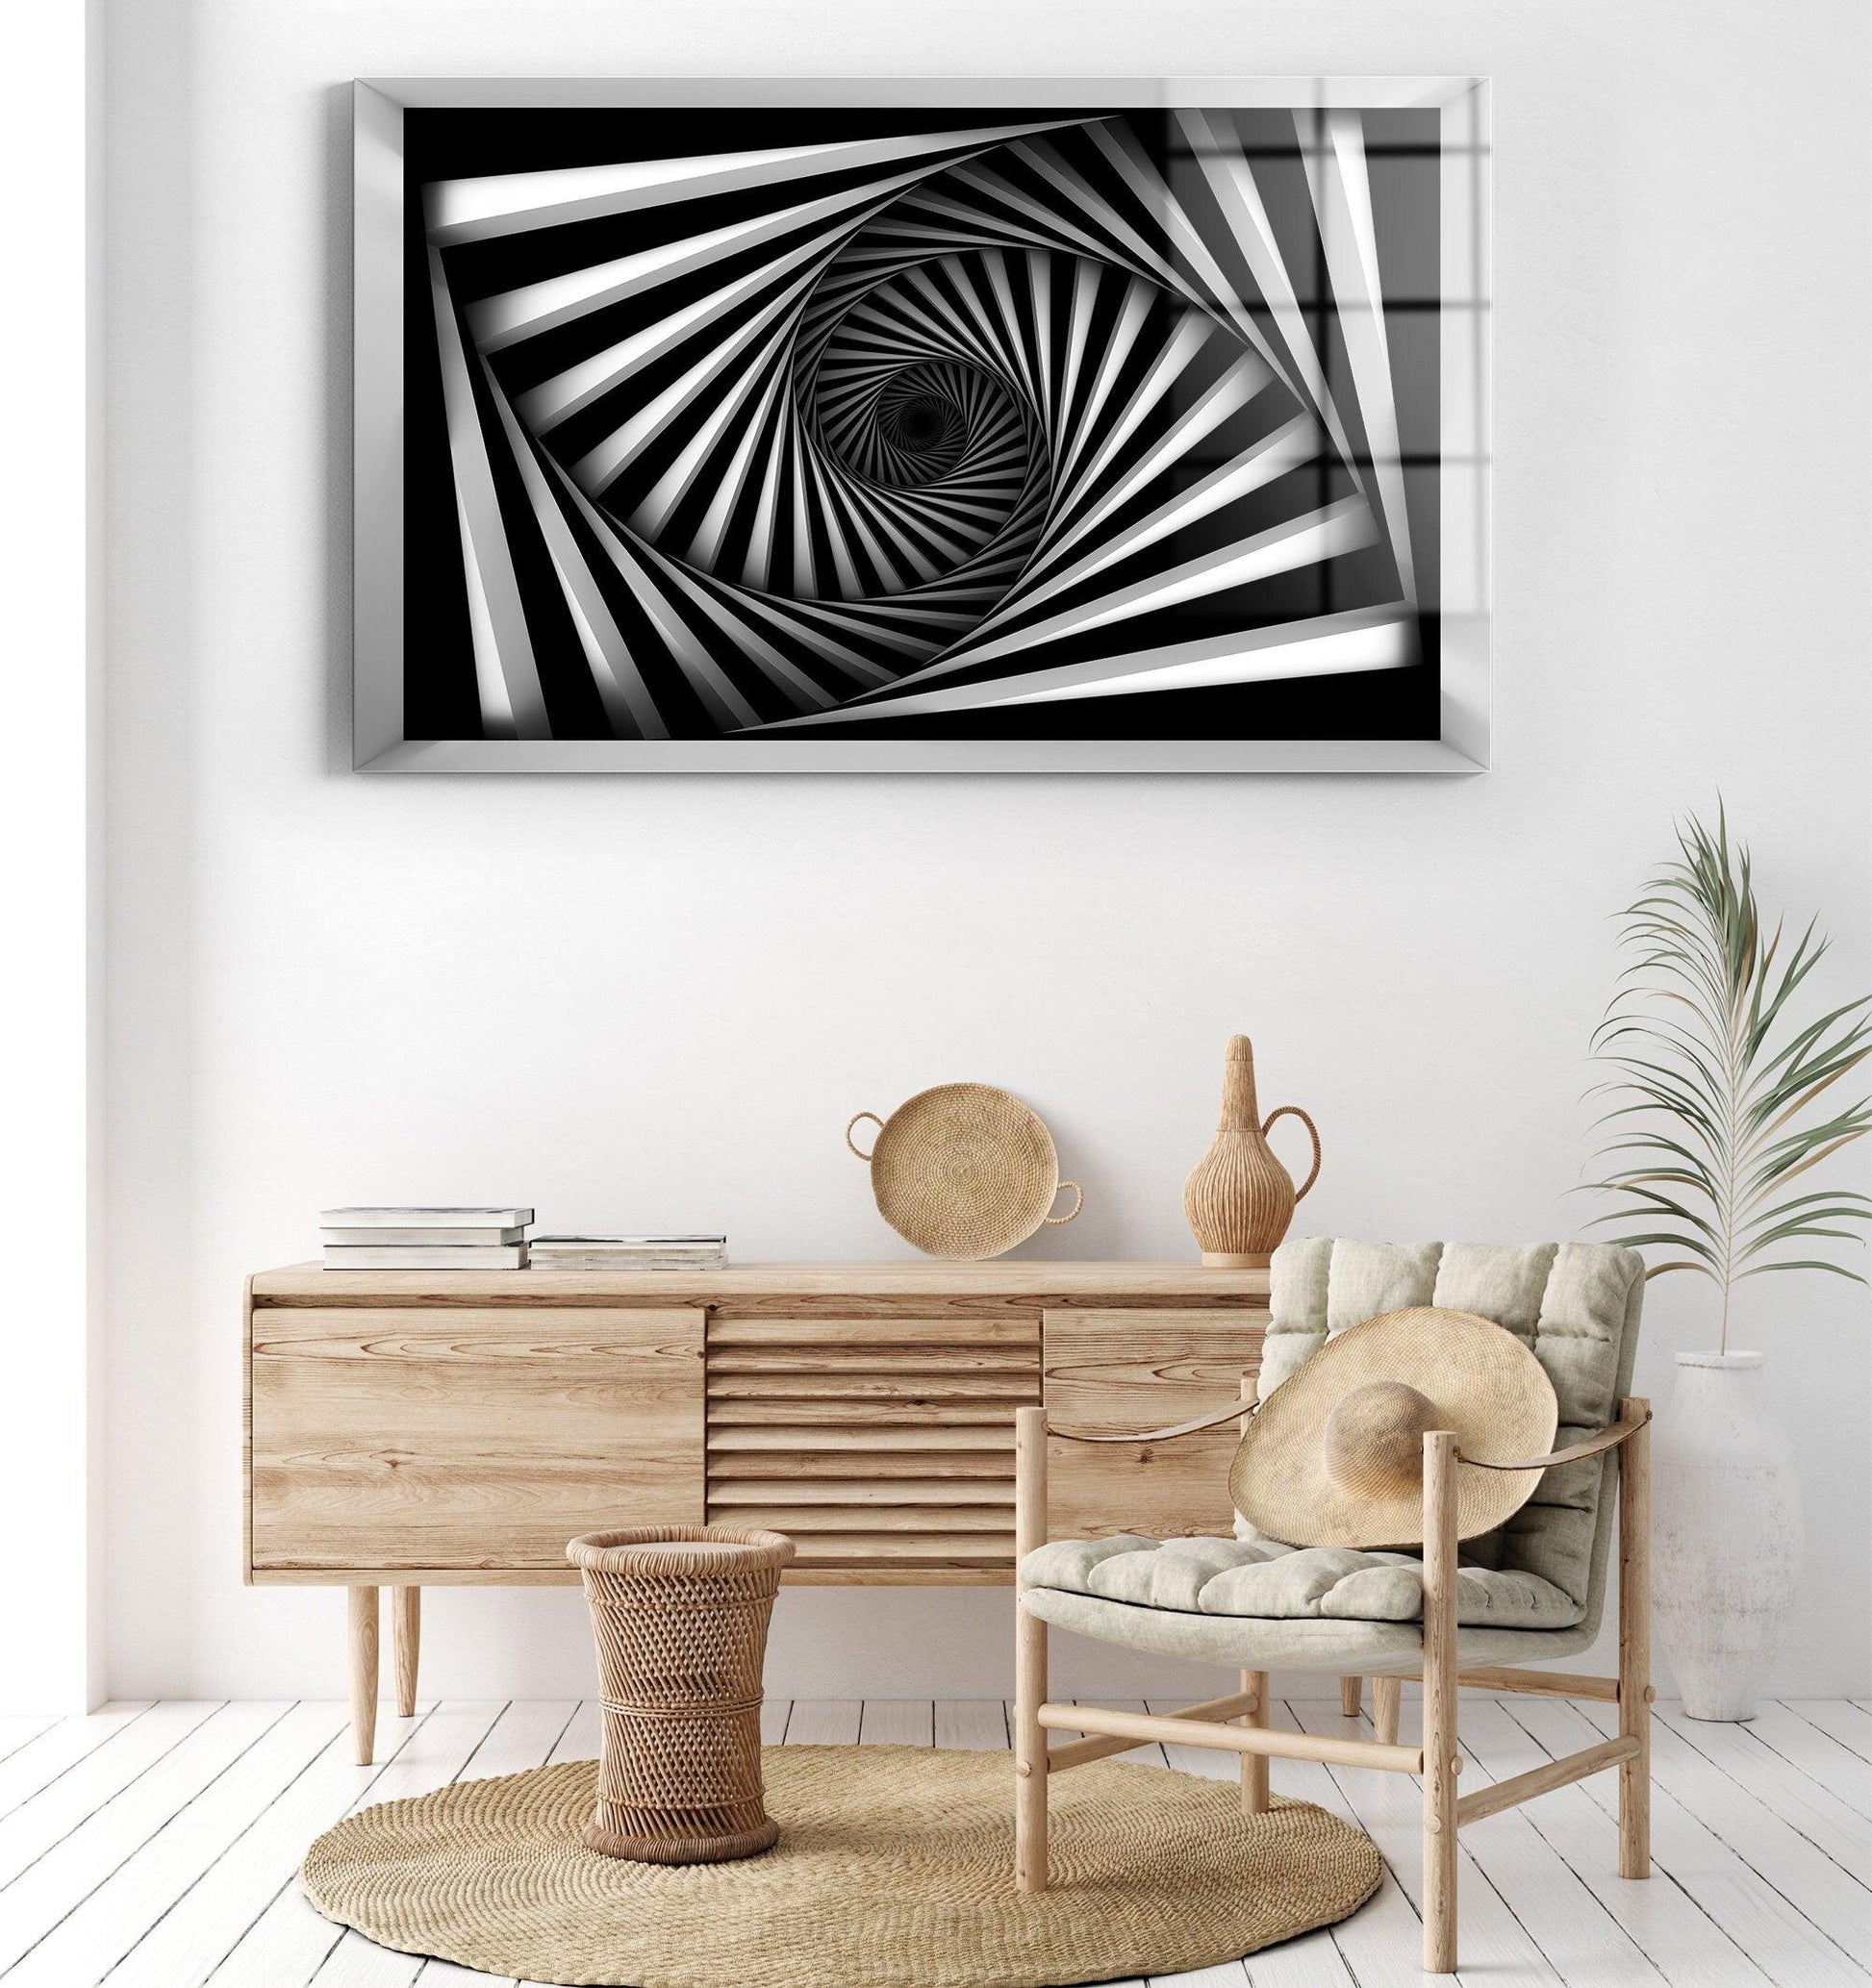 Psychedelic Vector glass wall art| black white wall art, Retro Wavy Lines, black white wall art, abstract background glass wall art - TrendiArt